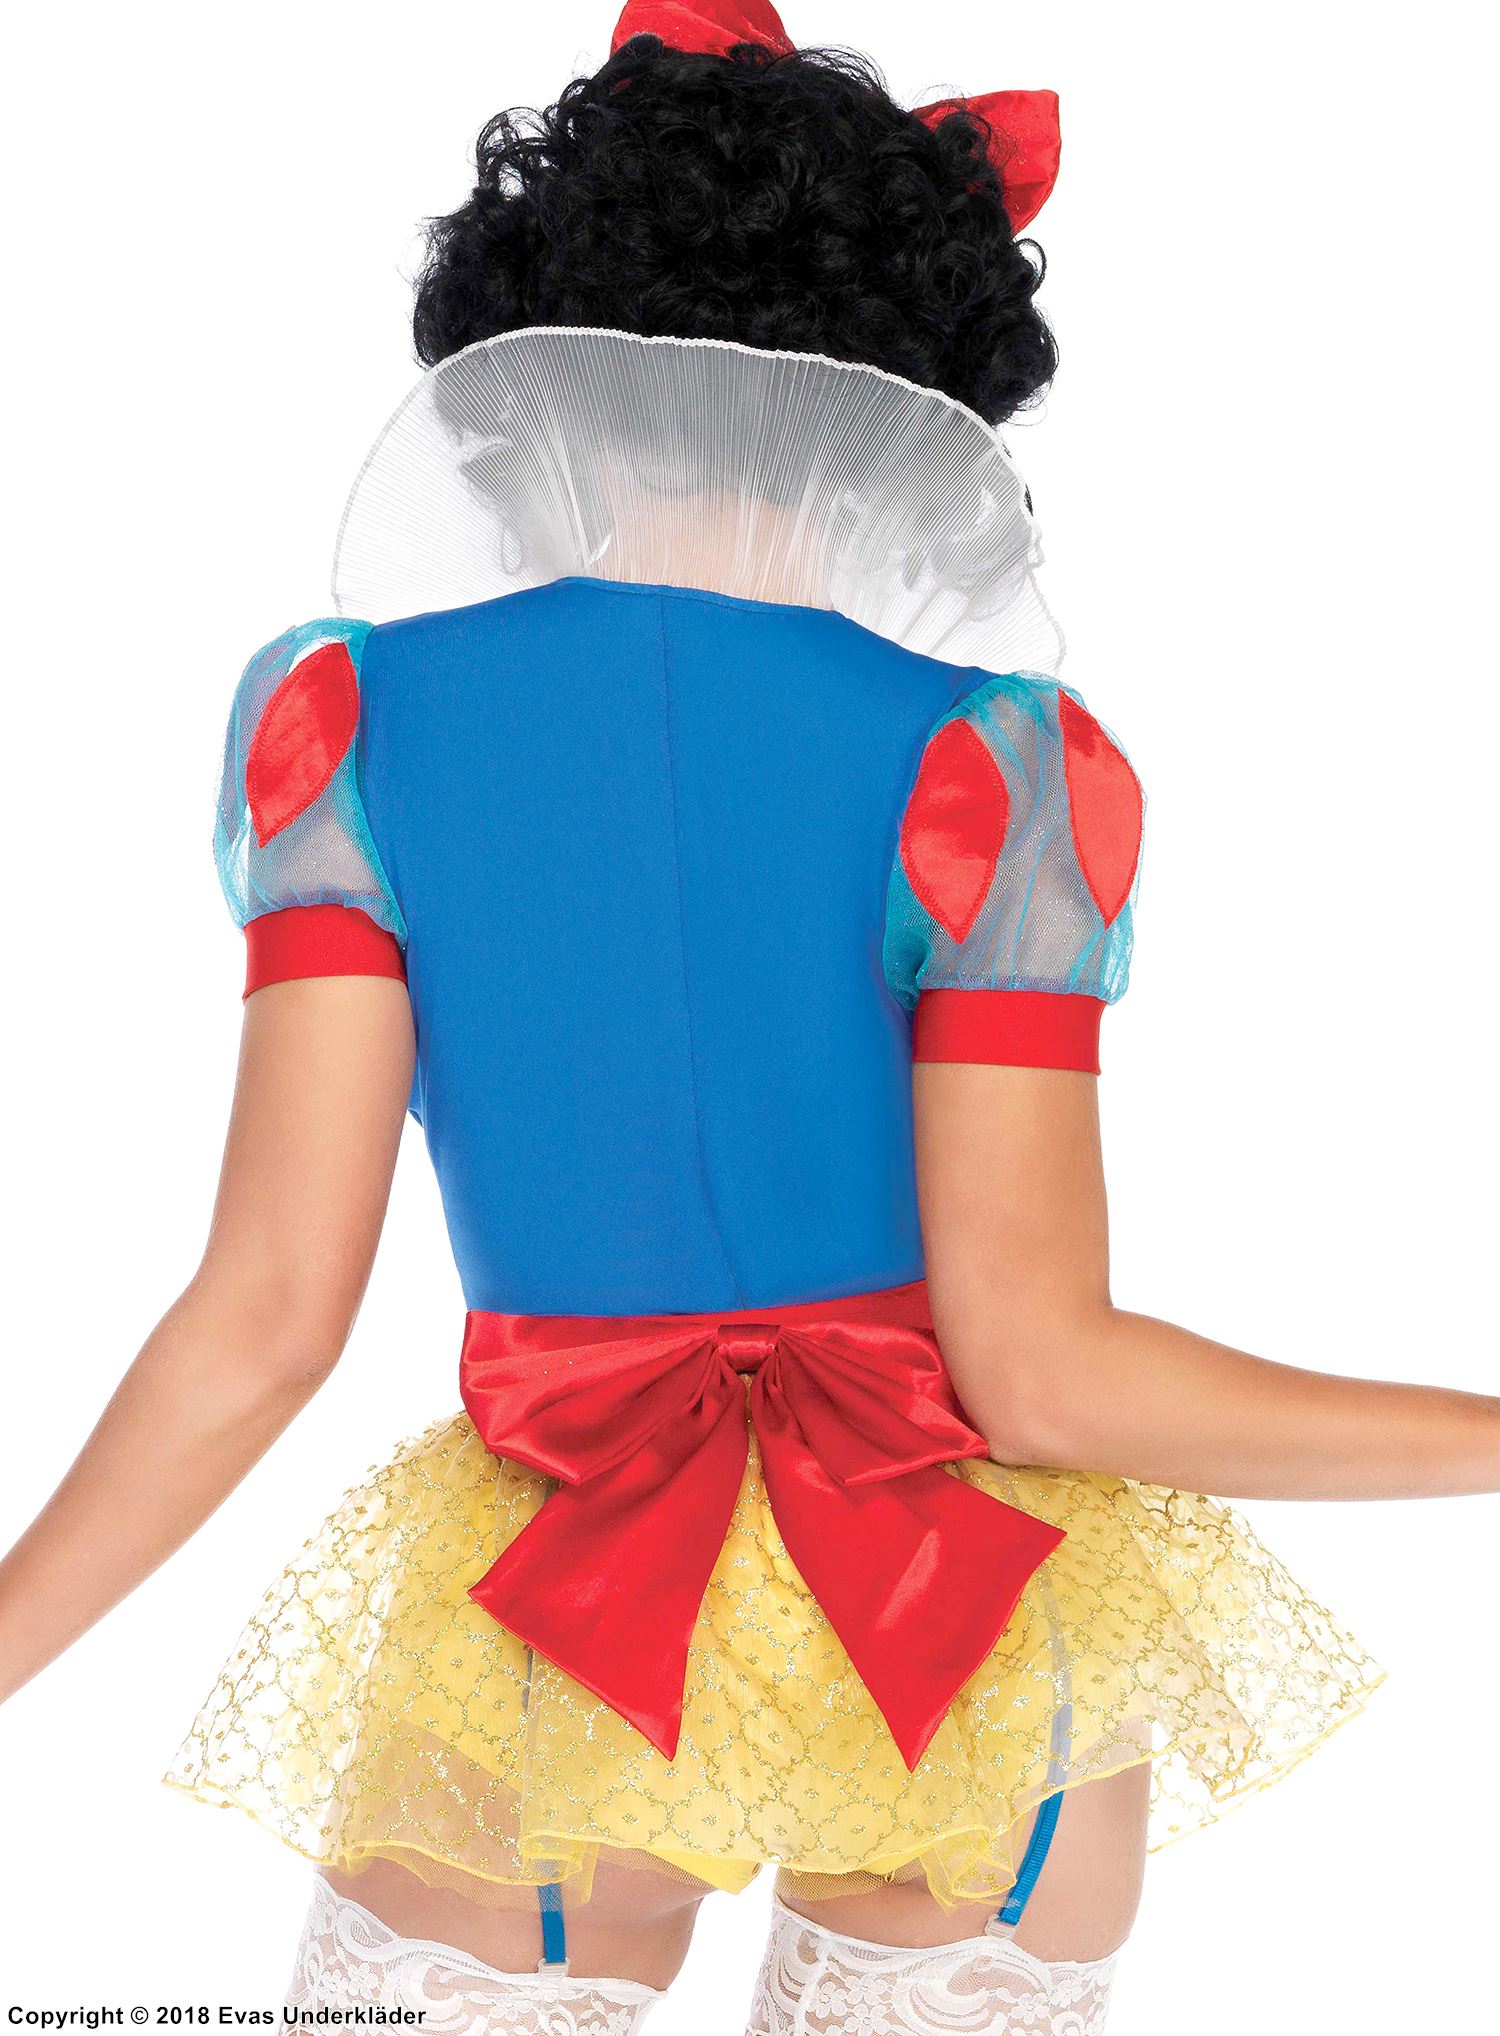 Snow White, costume dress, big bow, stay up collar